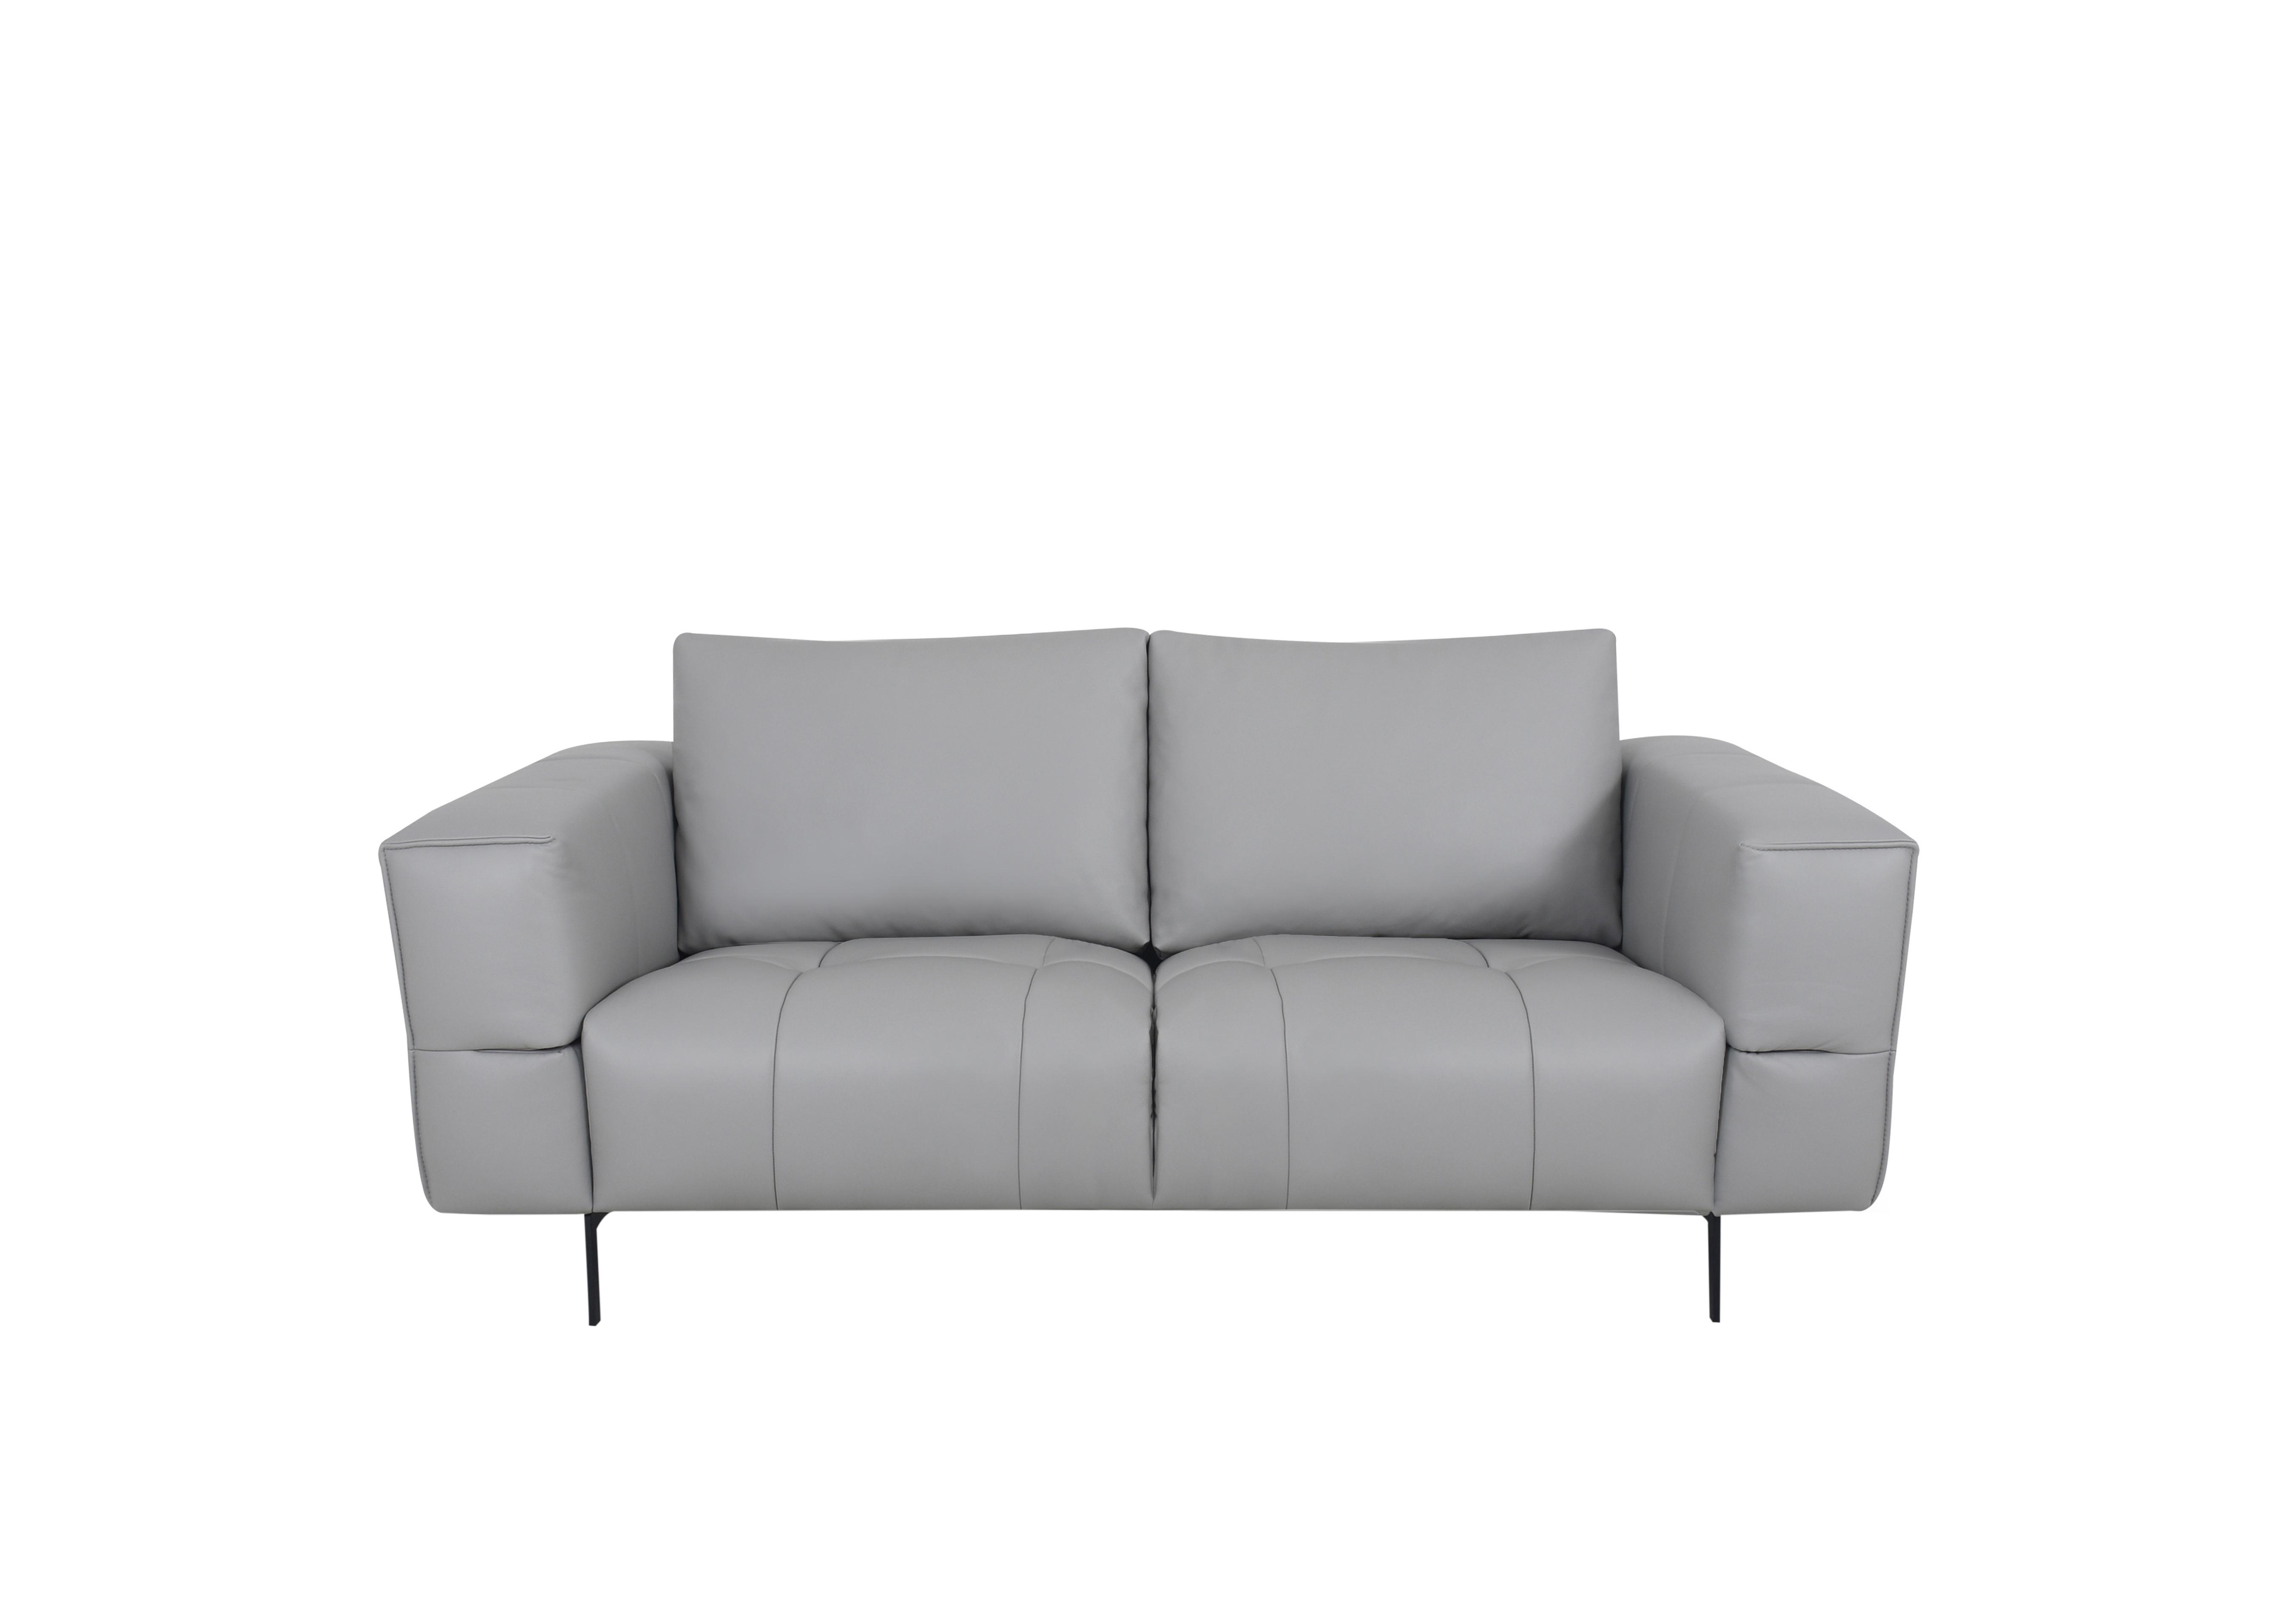 Lawson 2 Seater Leather Sofa in Np-516e Light Grey on Furniture Village